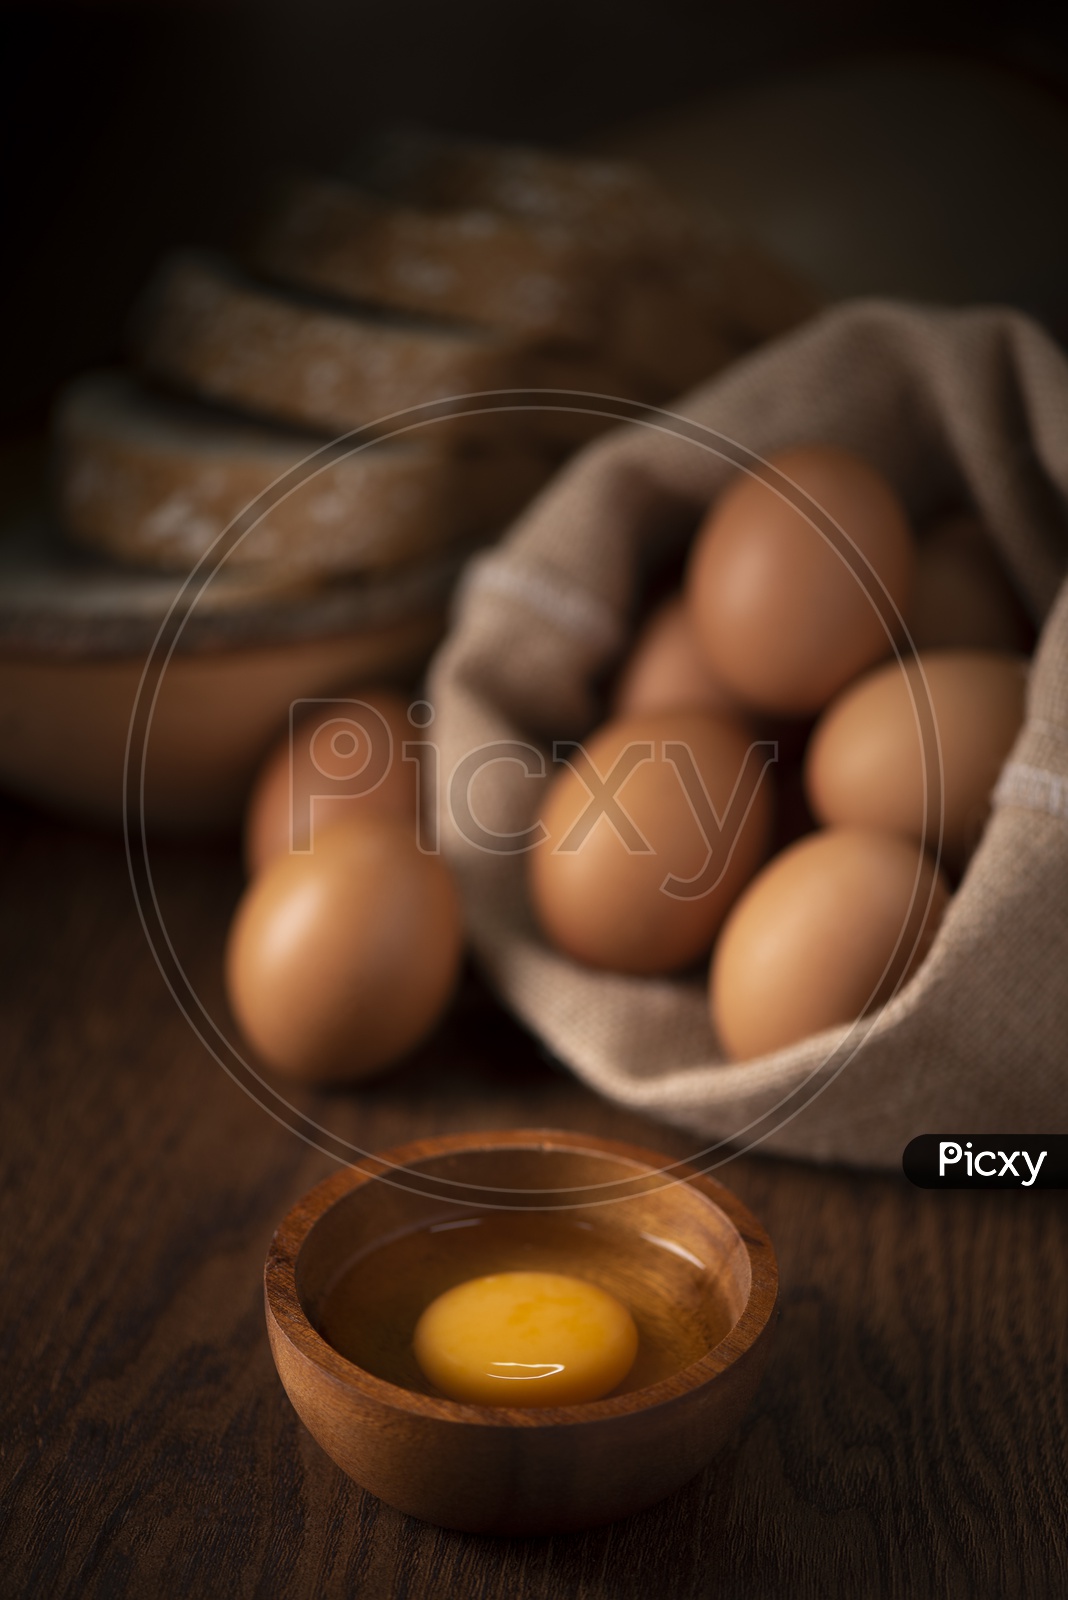 Fresh Brown Eggs In a Sack , Broken Egg With Yolk In a Bowl